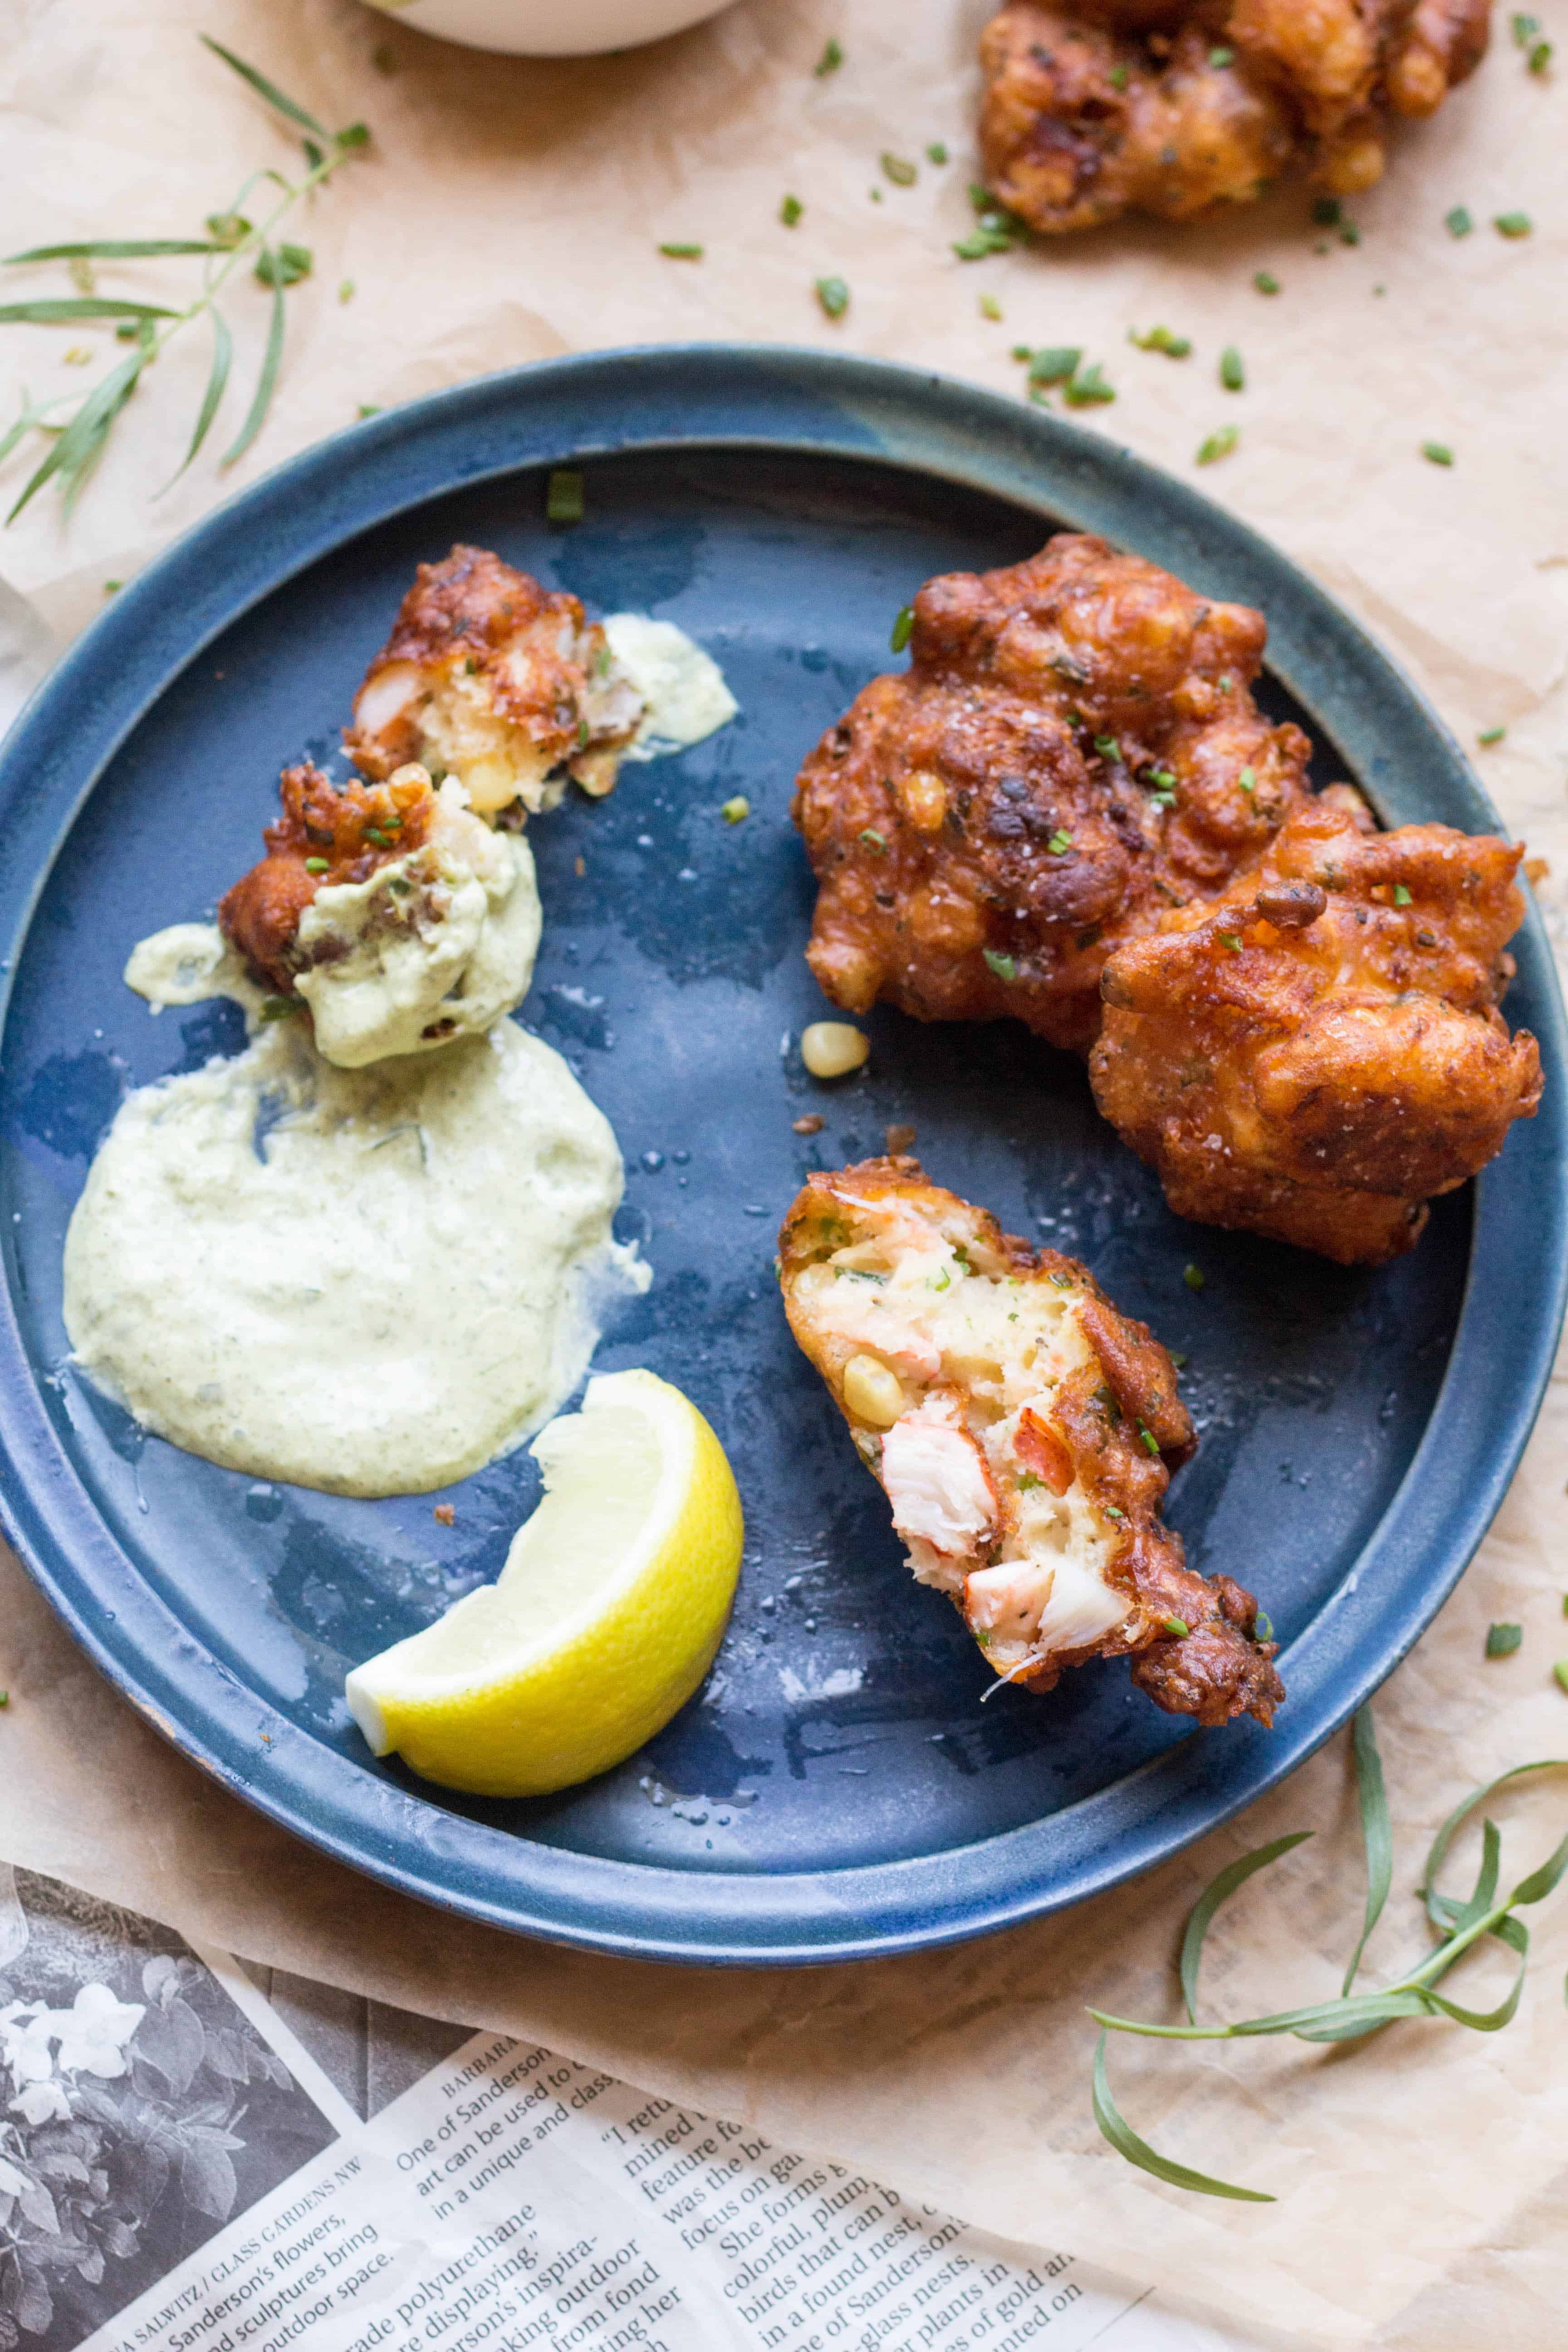 Top view of a blue plate with a lemon wedge, two corn fritters, and one fritter dipped into a pool of tarragon aoli.